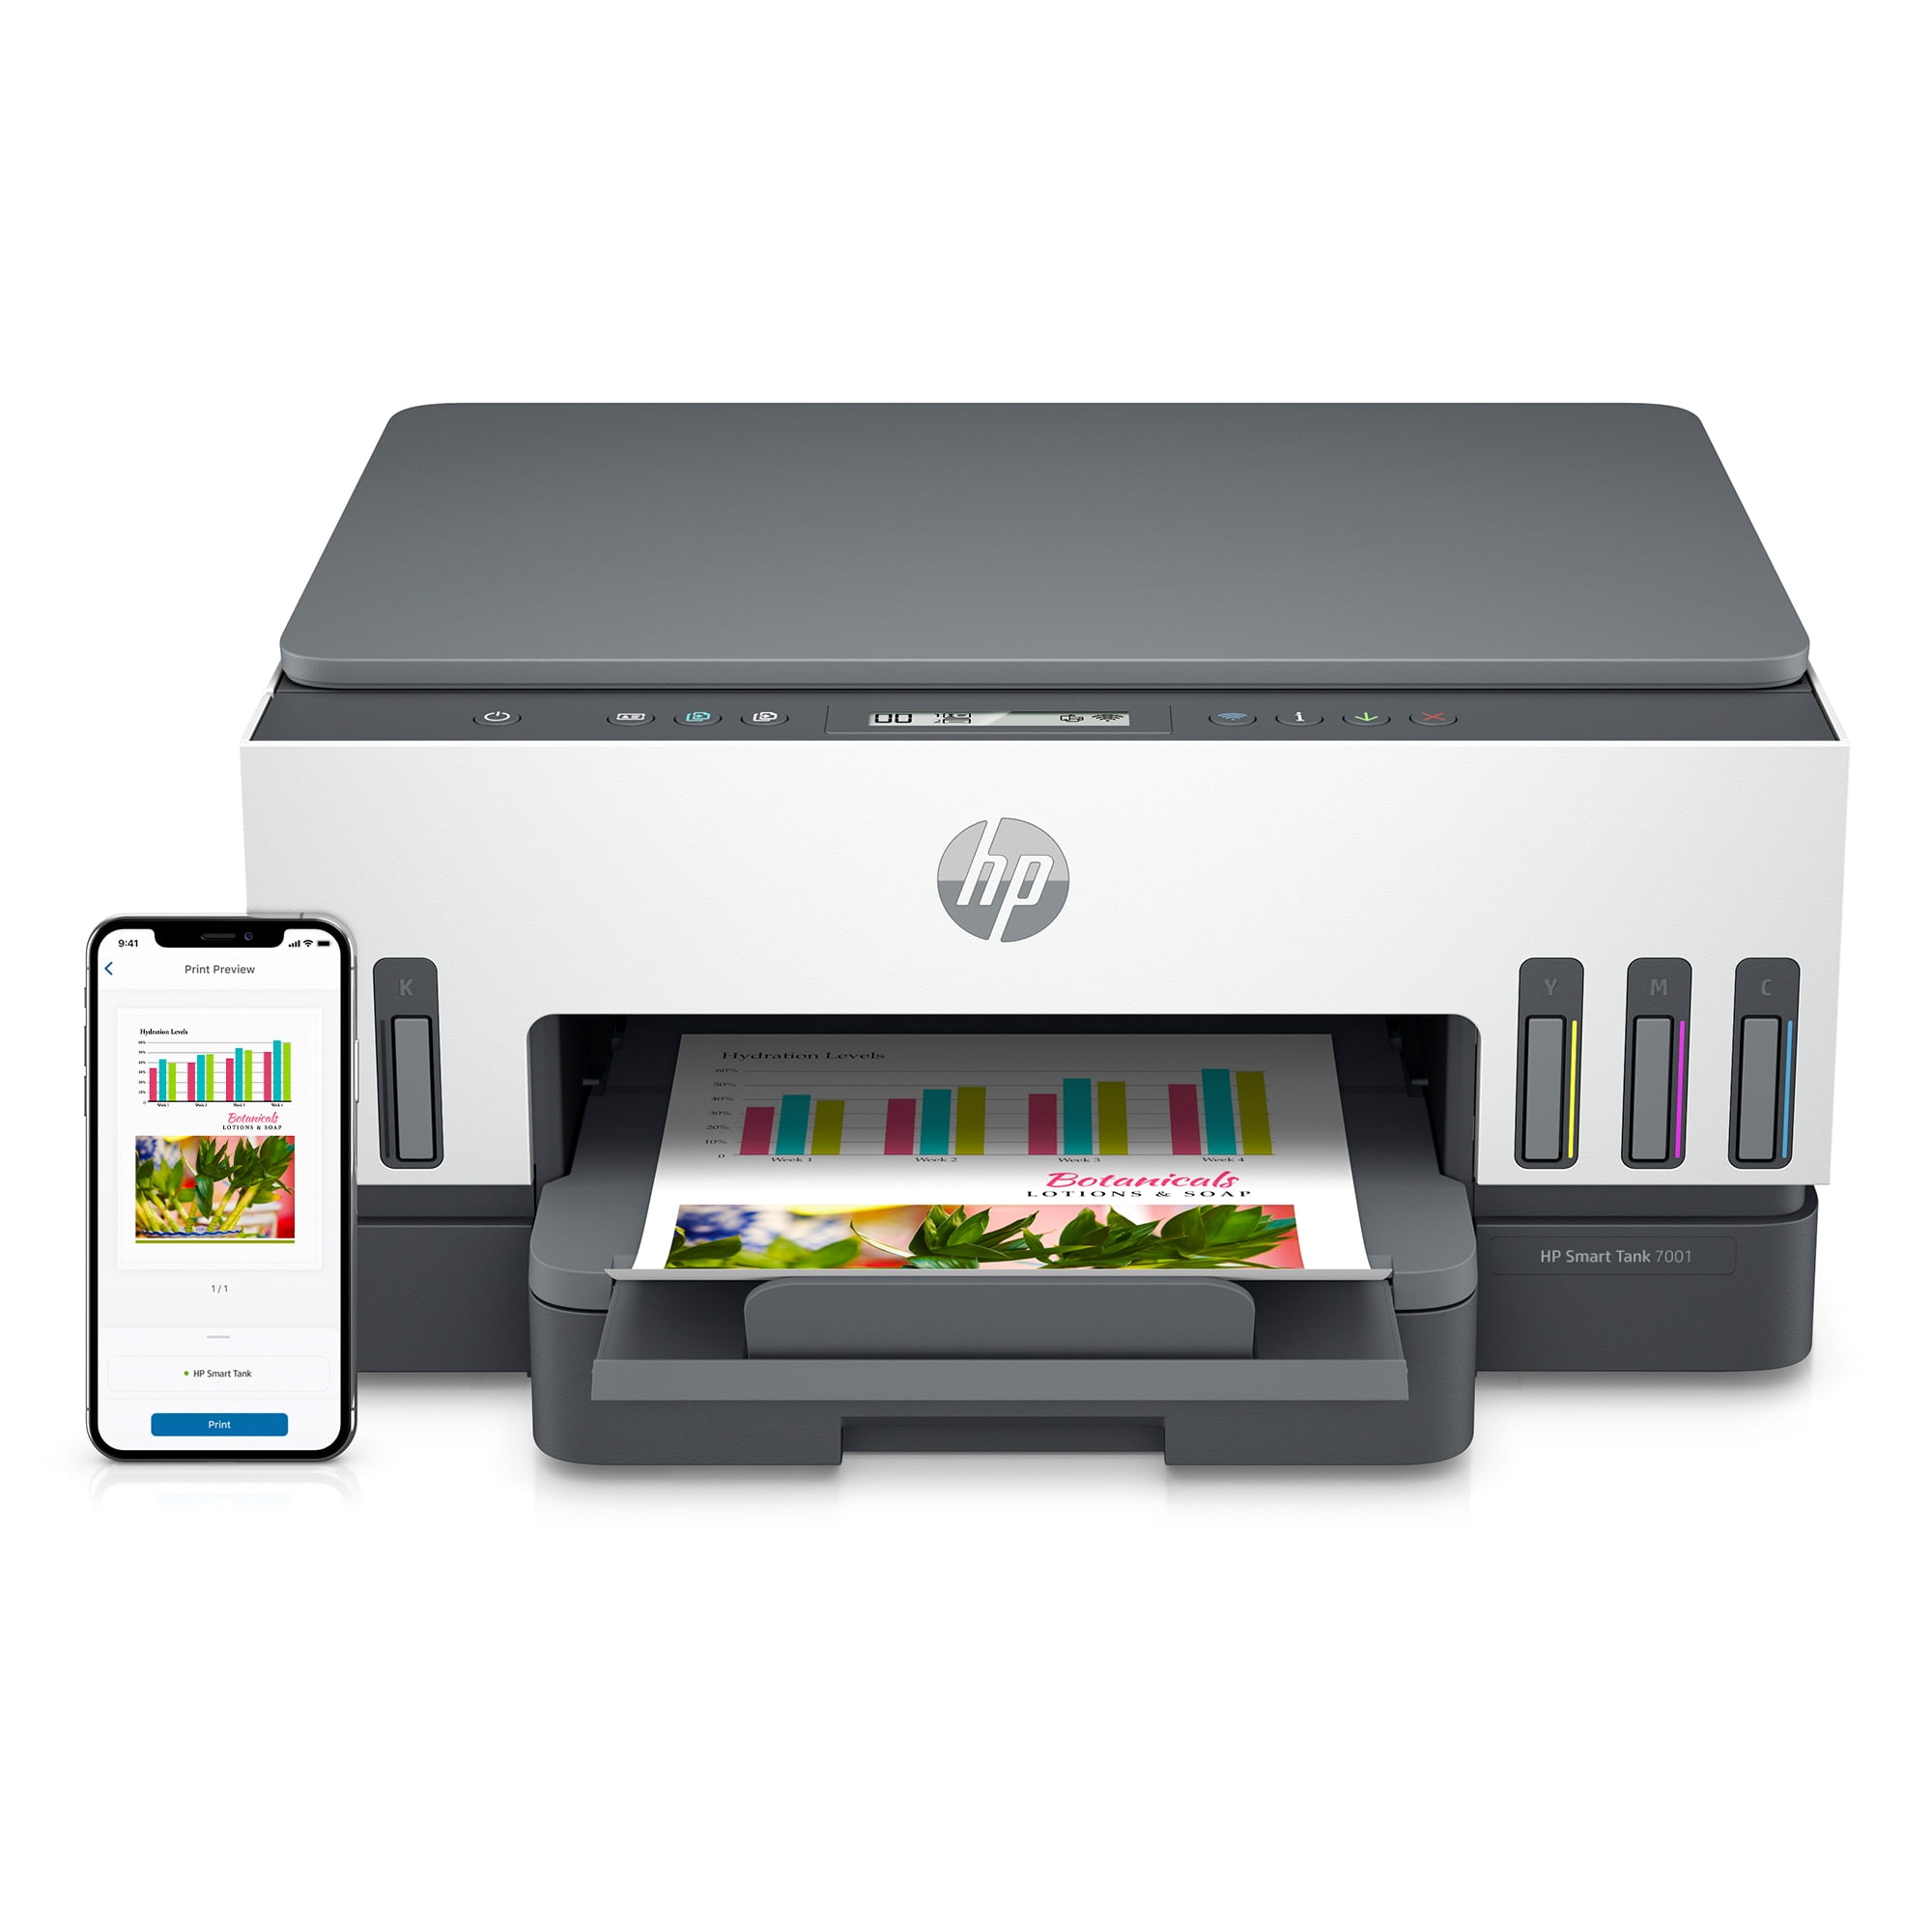 HP Tank 7001 Wireless Cartridge-free Color Ink Tank Printer, up to 2 Years Ink Included - Walmart.com